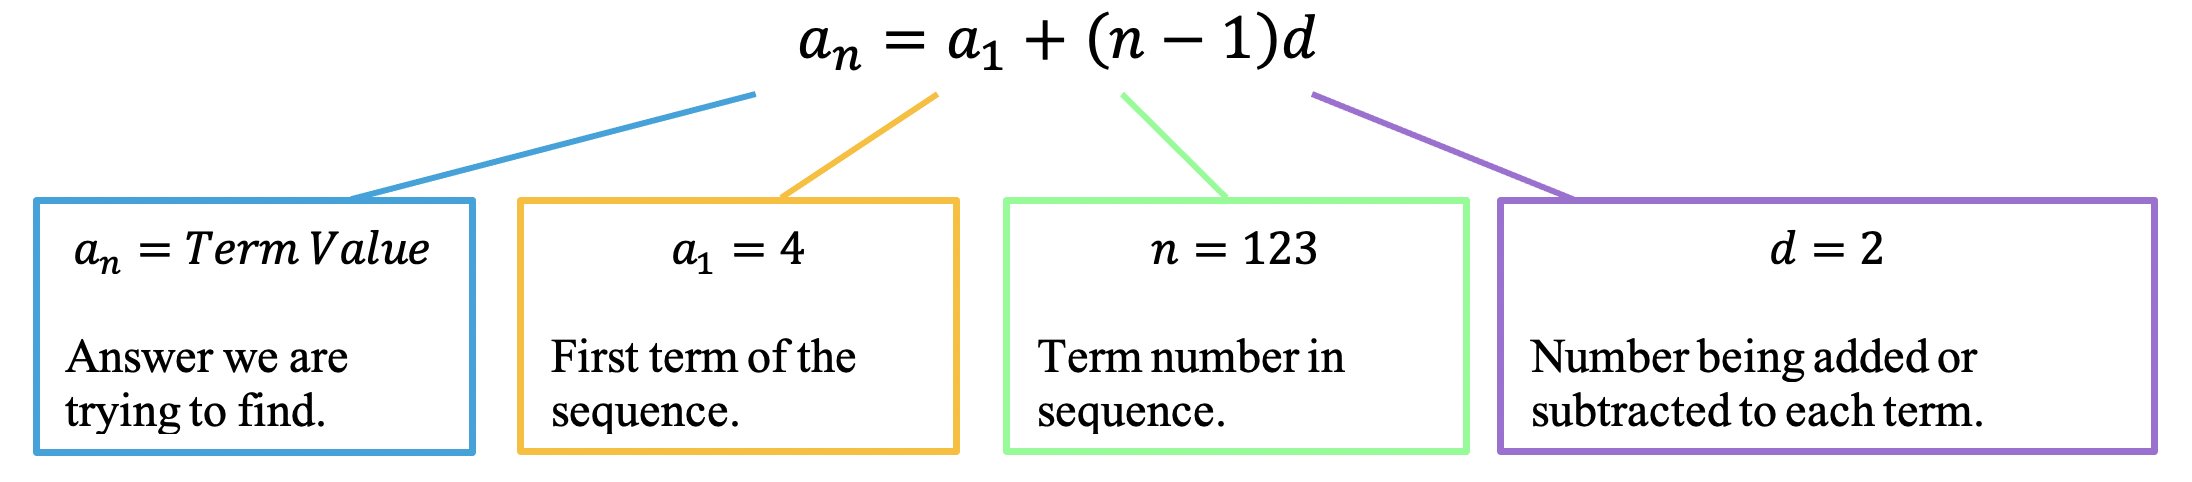 active learning sequences math